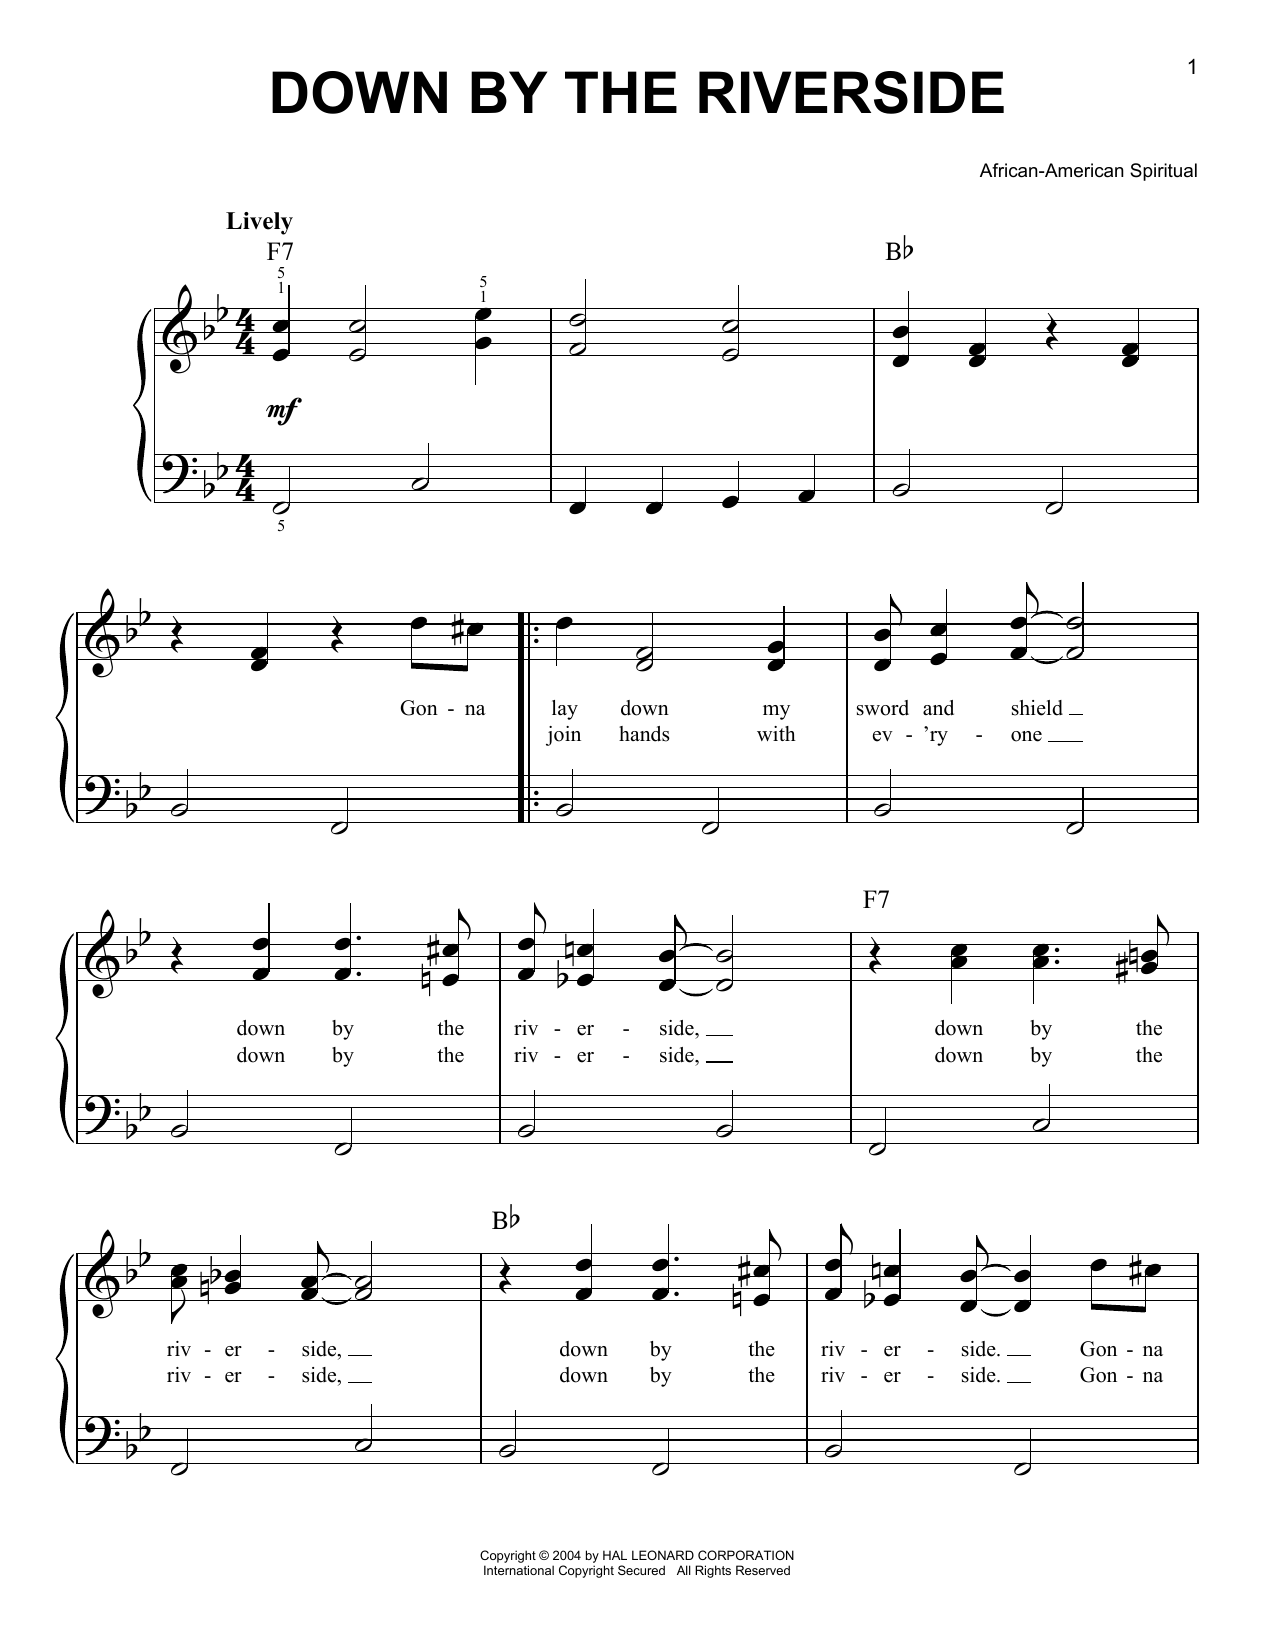 African-American Spiritual Down By The Riverside sheet music notes and chords. Download Printable PDF.